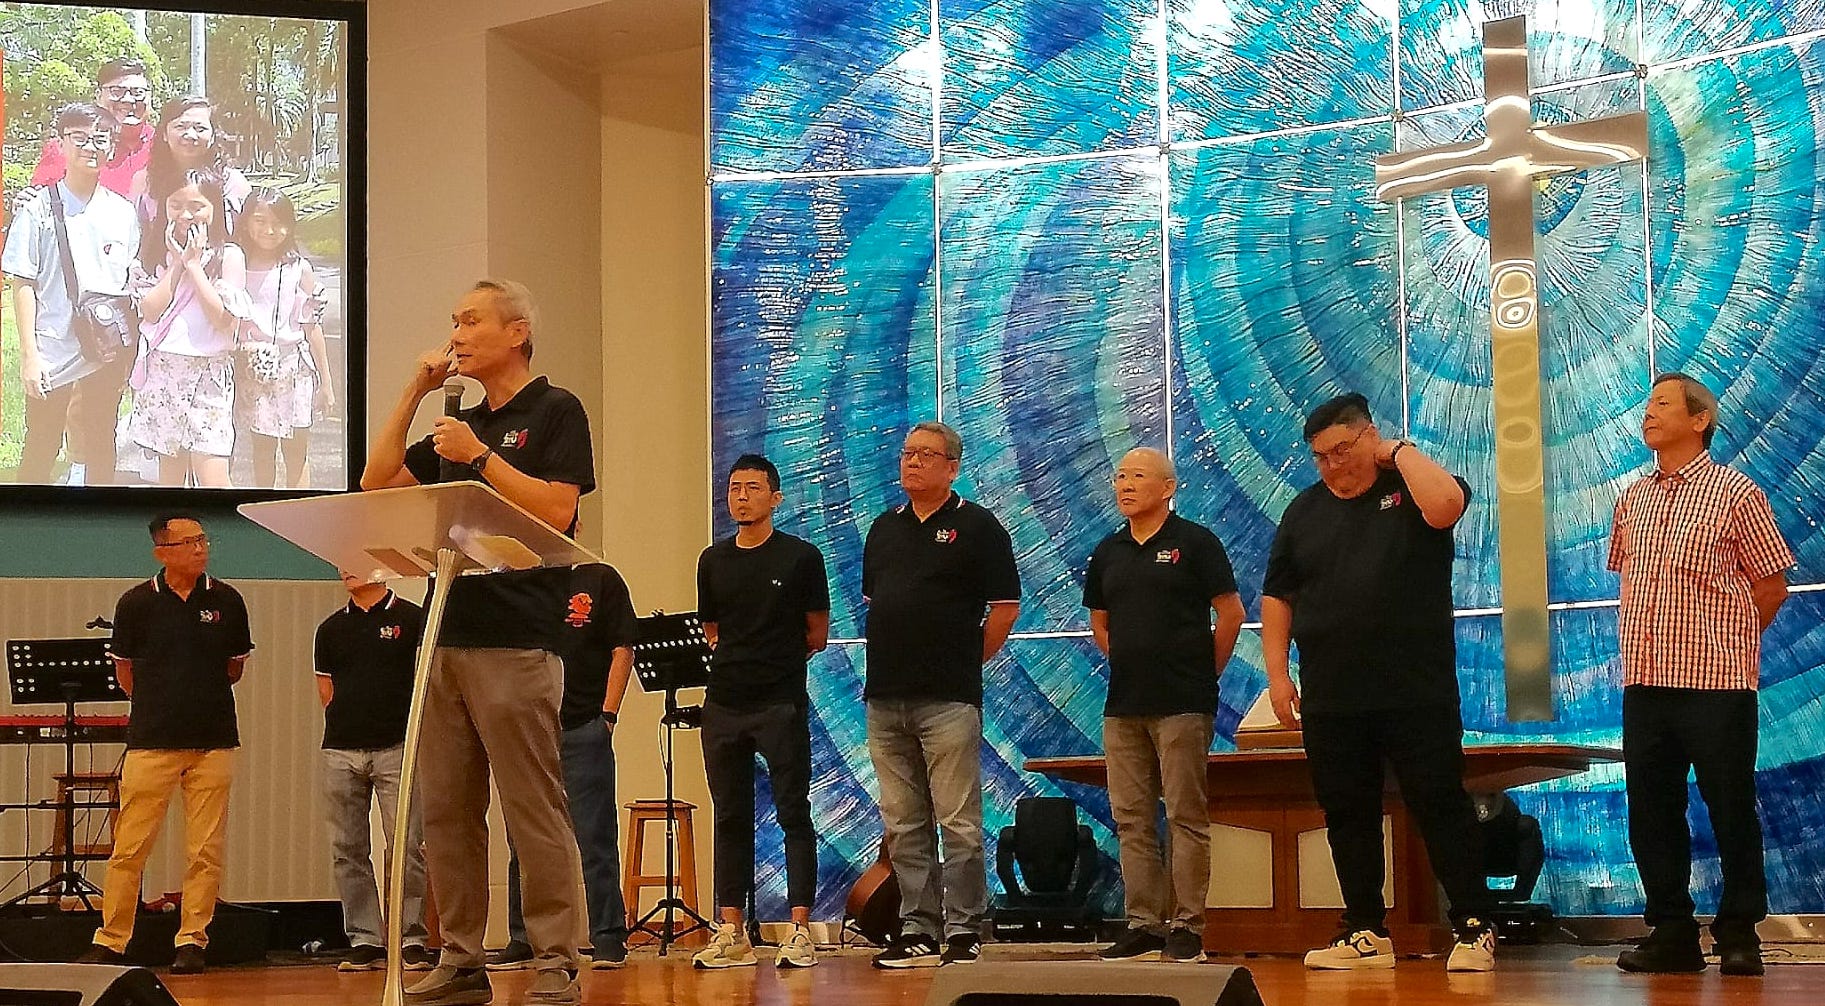 To demonstrate the impact that looking to God the Father can have, a diverse panel of Elijah7000 fathers shared a string of one-minute testimonies about personal transformation and family restoration. All photos courtesy of Elijah7000.